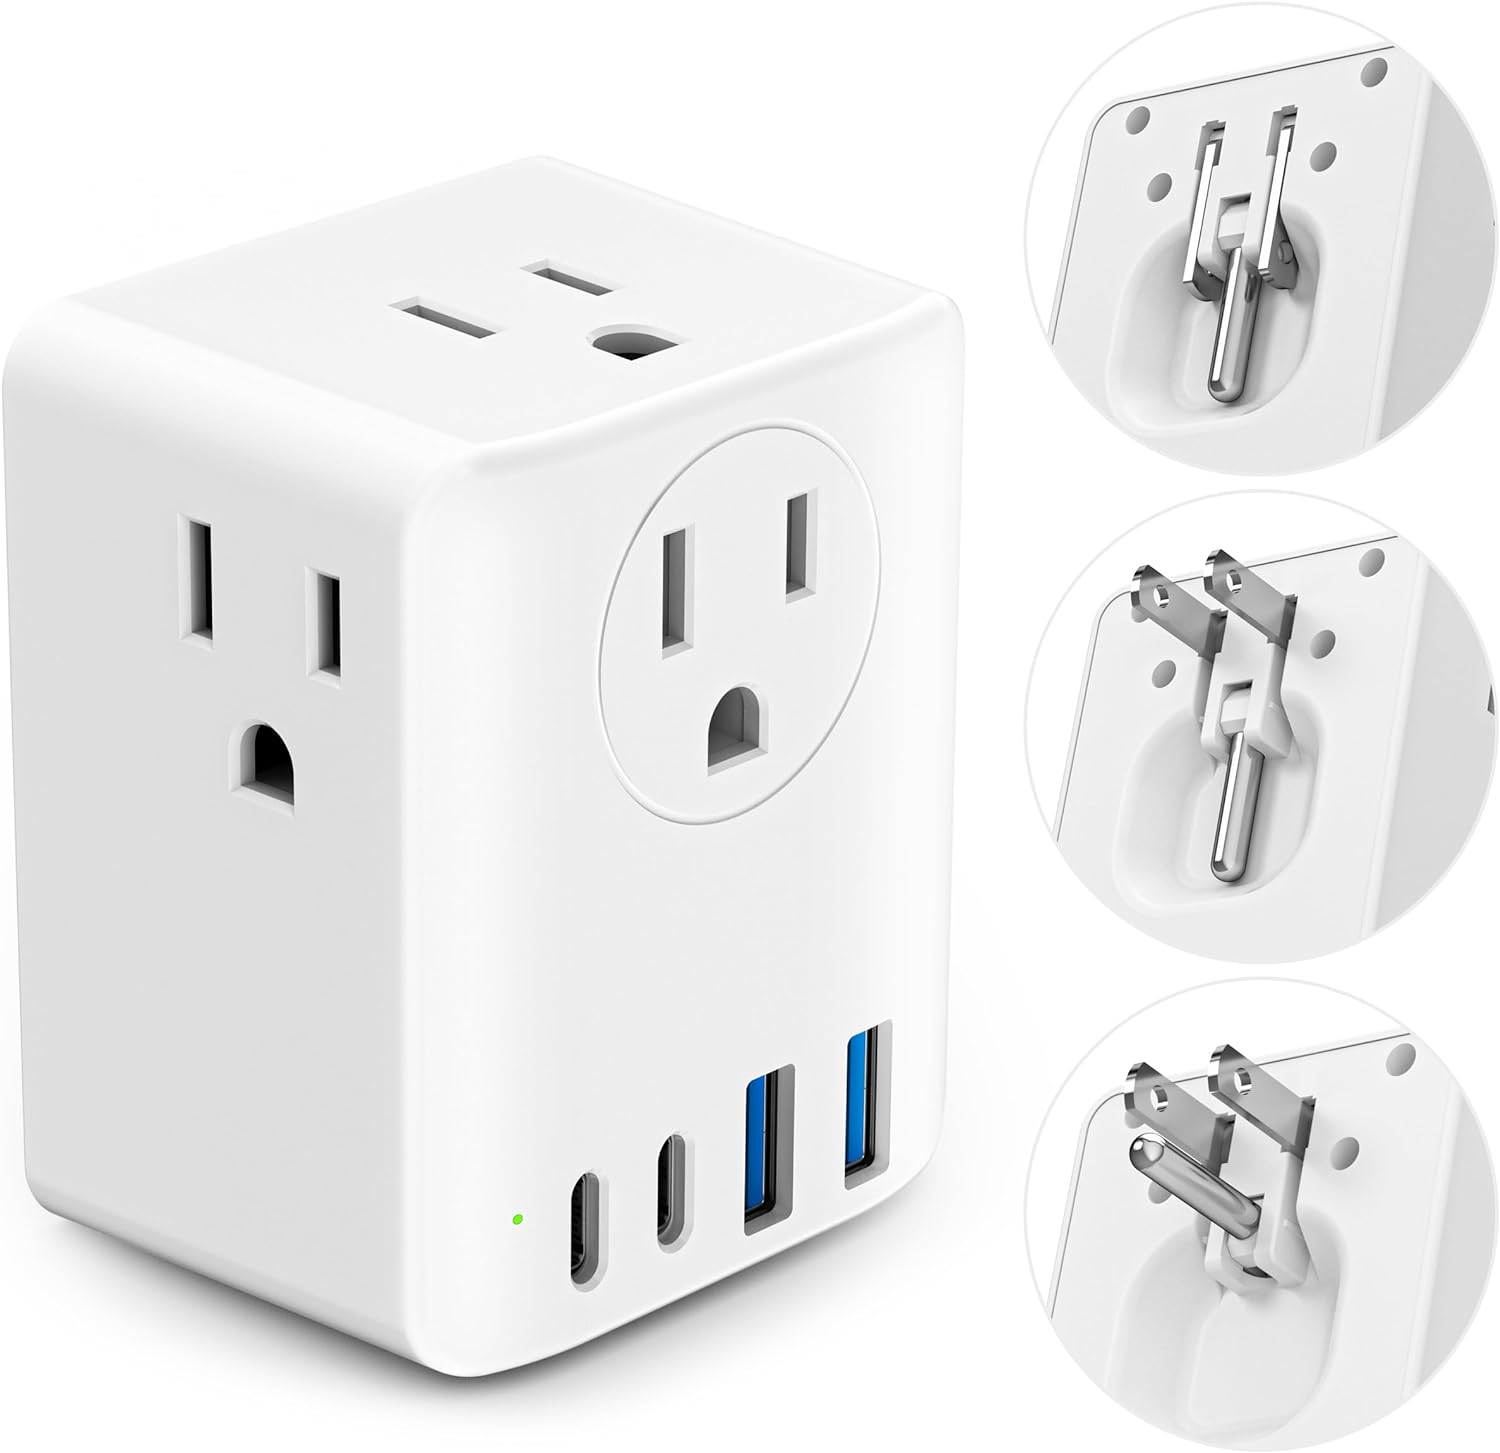 Cruise Ship Essentials, Foldable Travel Power Strip, 2 Prong to 3 Prong Outlet Adapter, Outlet Extender with 4 Outlets 4 USB Ports(2 USB C), Cruise Travel Dorm Room Essentials